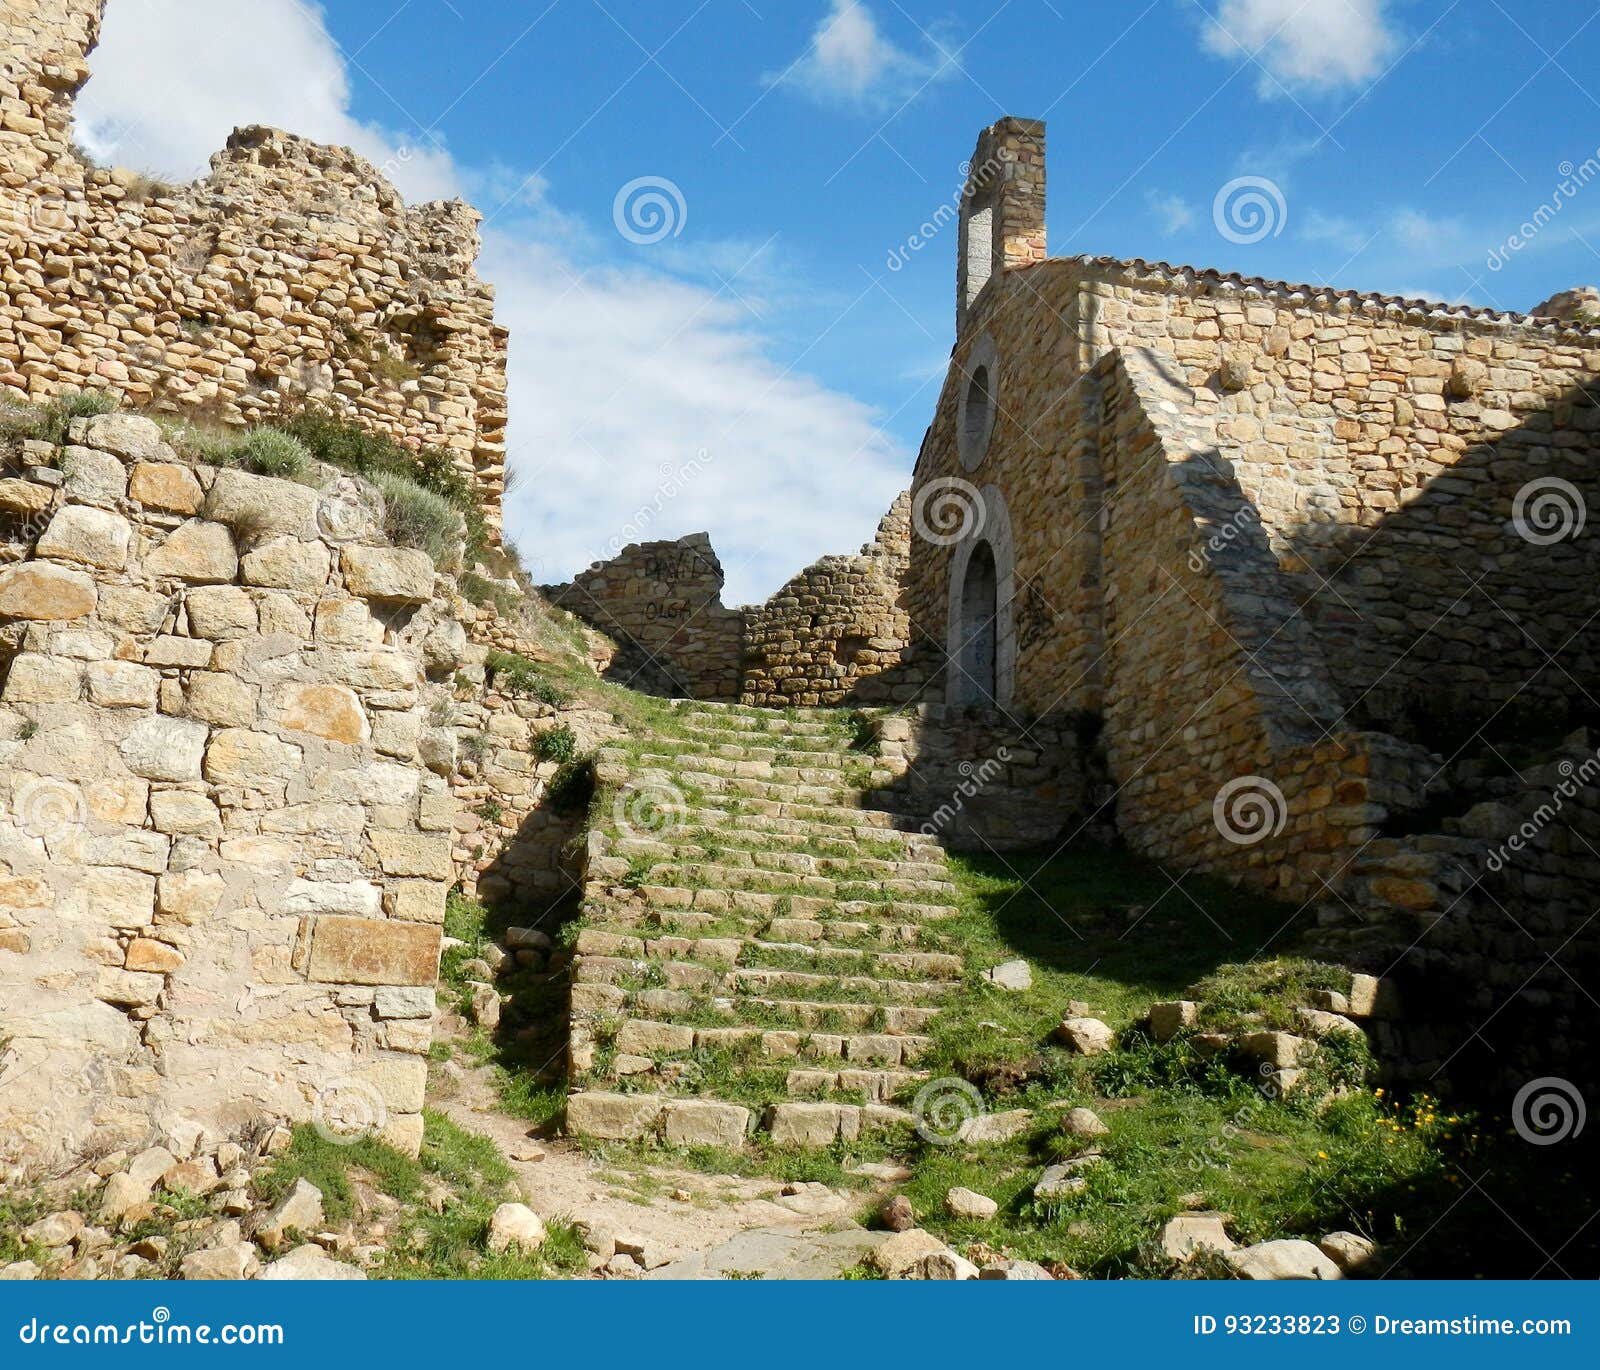 old stone castle with stairs in palafolls